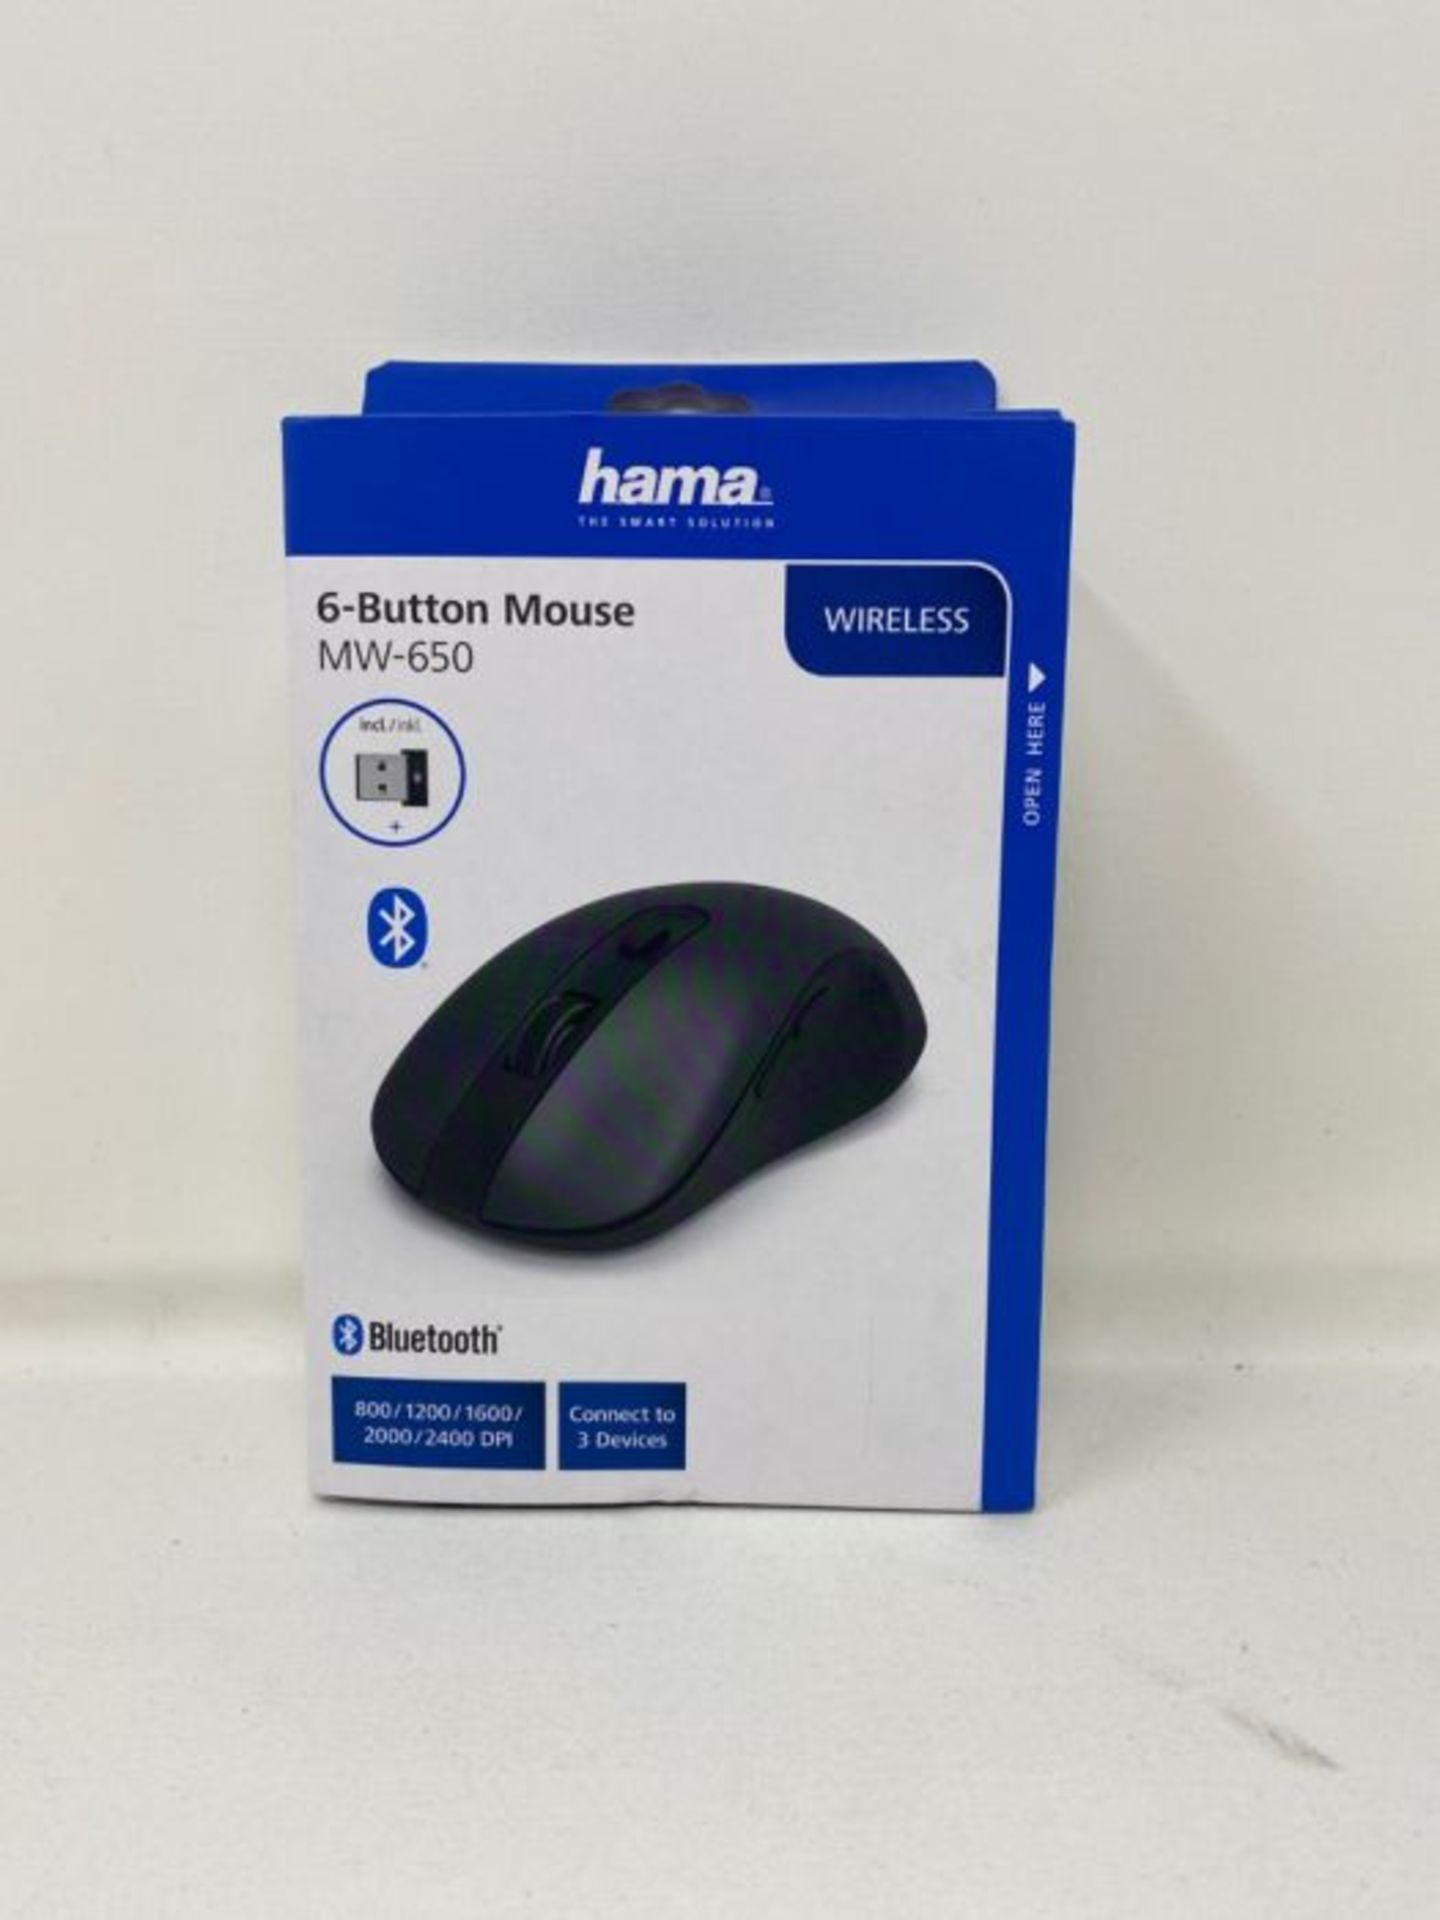 Hama Wireless Computer Mouse with 6 Buttons, Optical Mouse, Multi-Device Mouse for PC, - Image 2 of 3